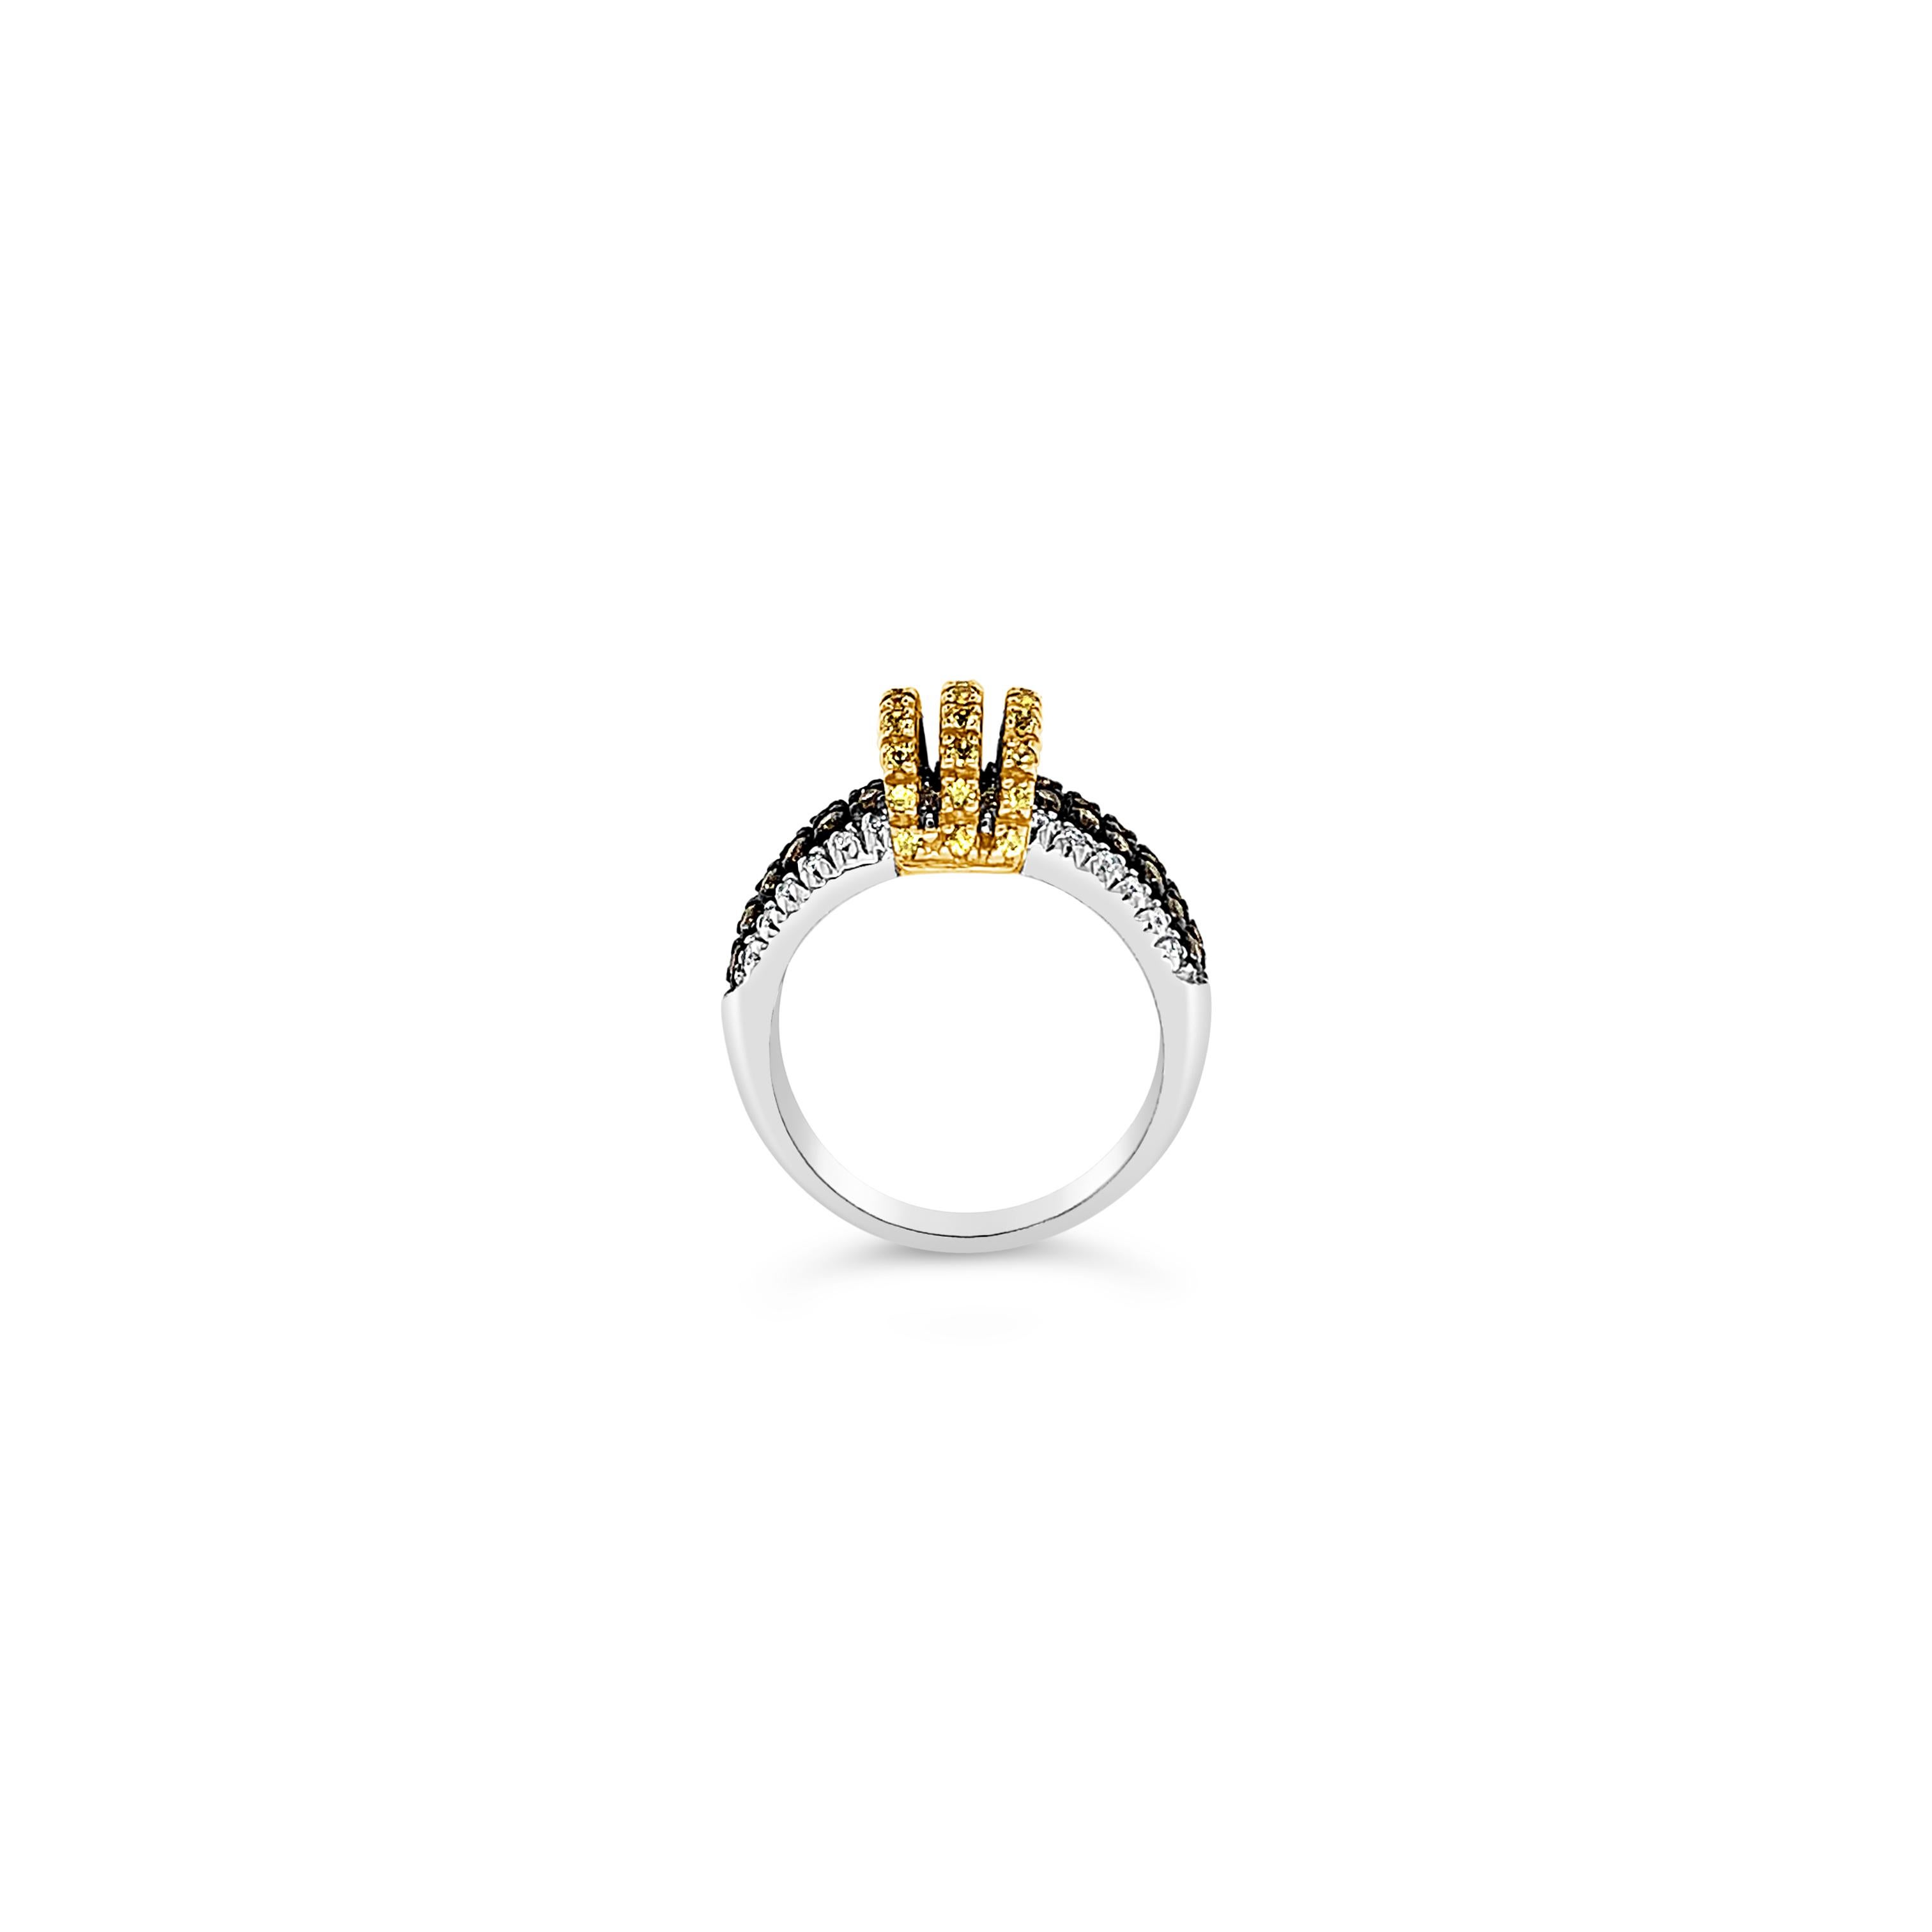 Le Vian Chocolatier® Ring featuring 1/3 cts. Yellow Sapphire, 1/3 cts. Chocolate Diamonds®, 1/6 cts. Vanilla Diamonds® set in 14K Two Tone Gold. Please feel free to reach out with any questions! Item comes with a Le Vian® jewelry box as well as a Le